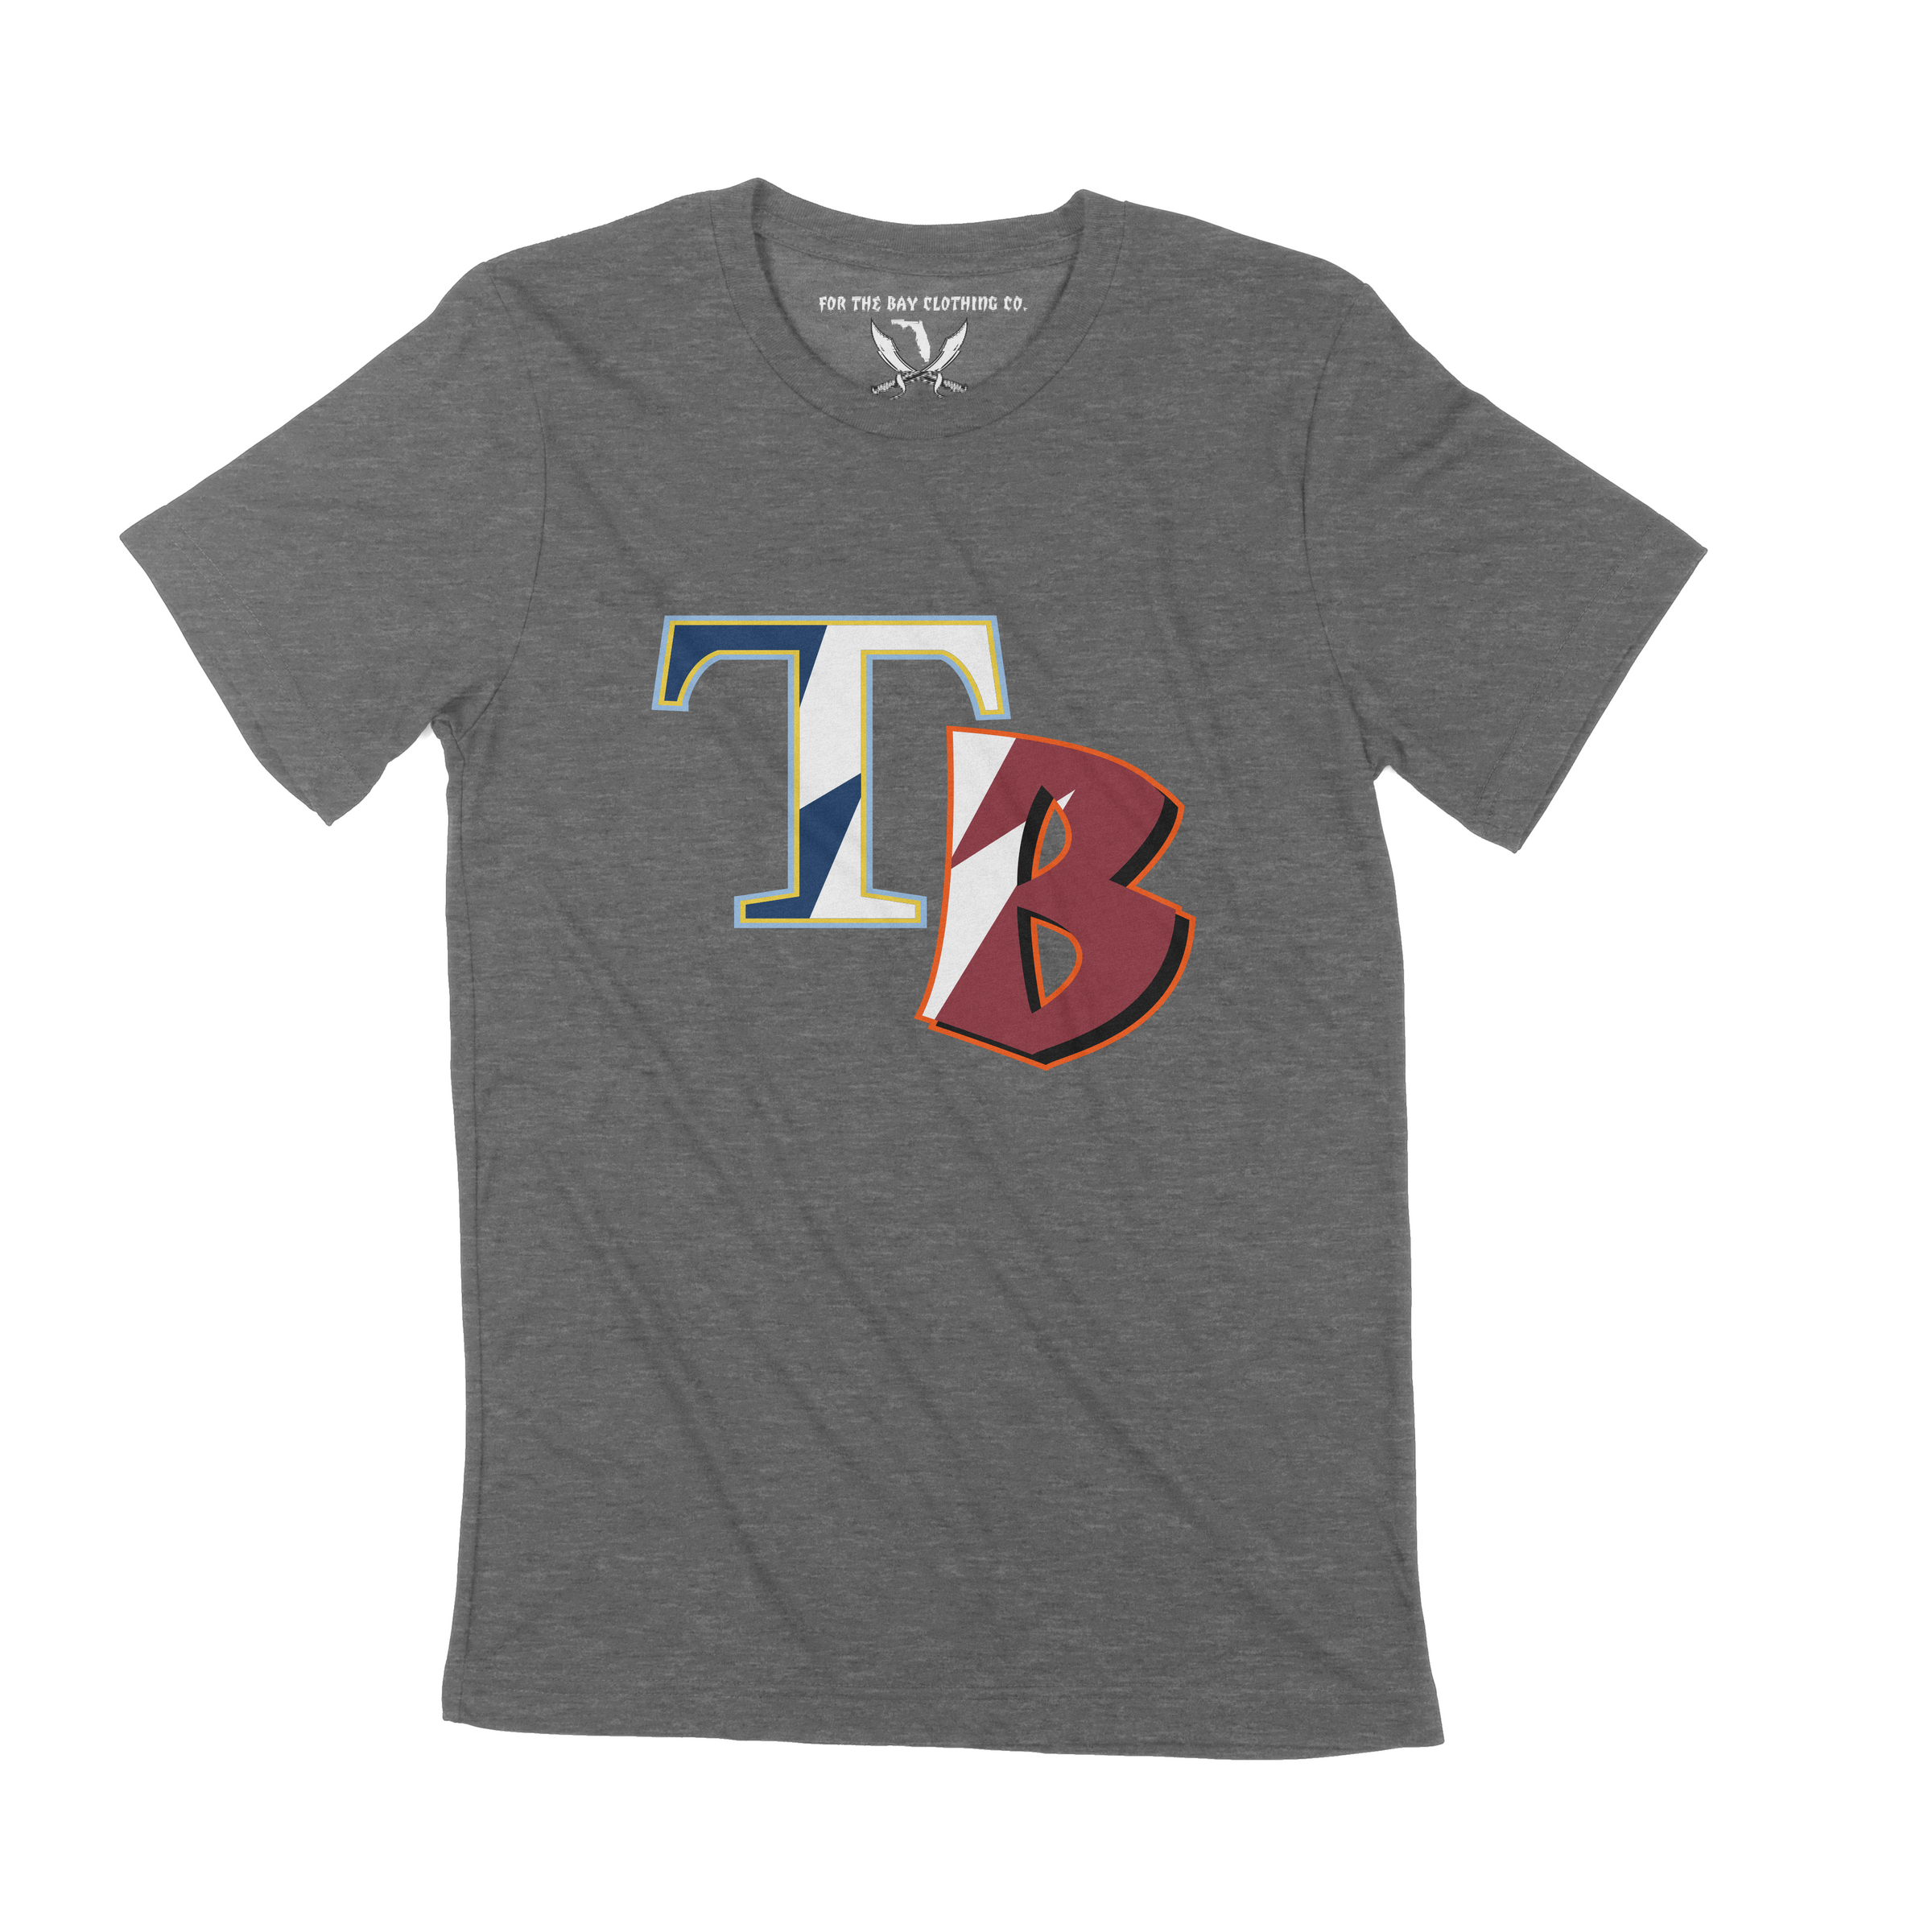 Tampa Bay Collection – For the Bay Clothing Co.